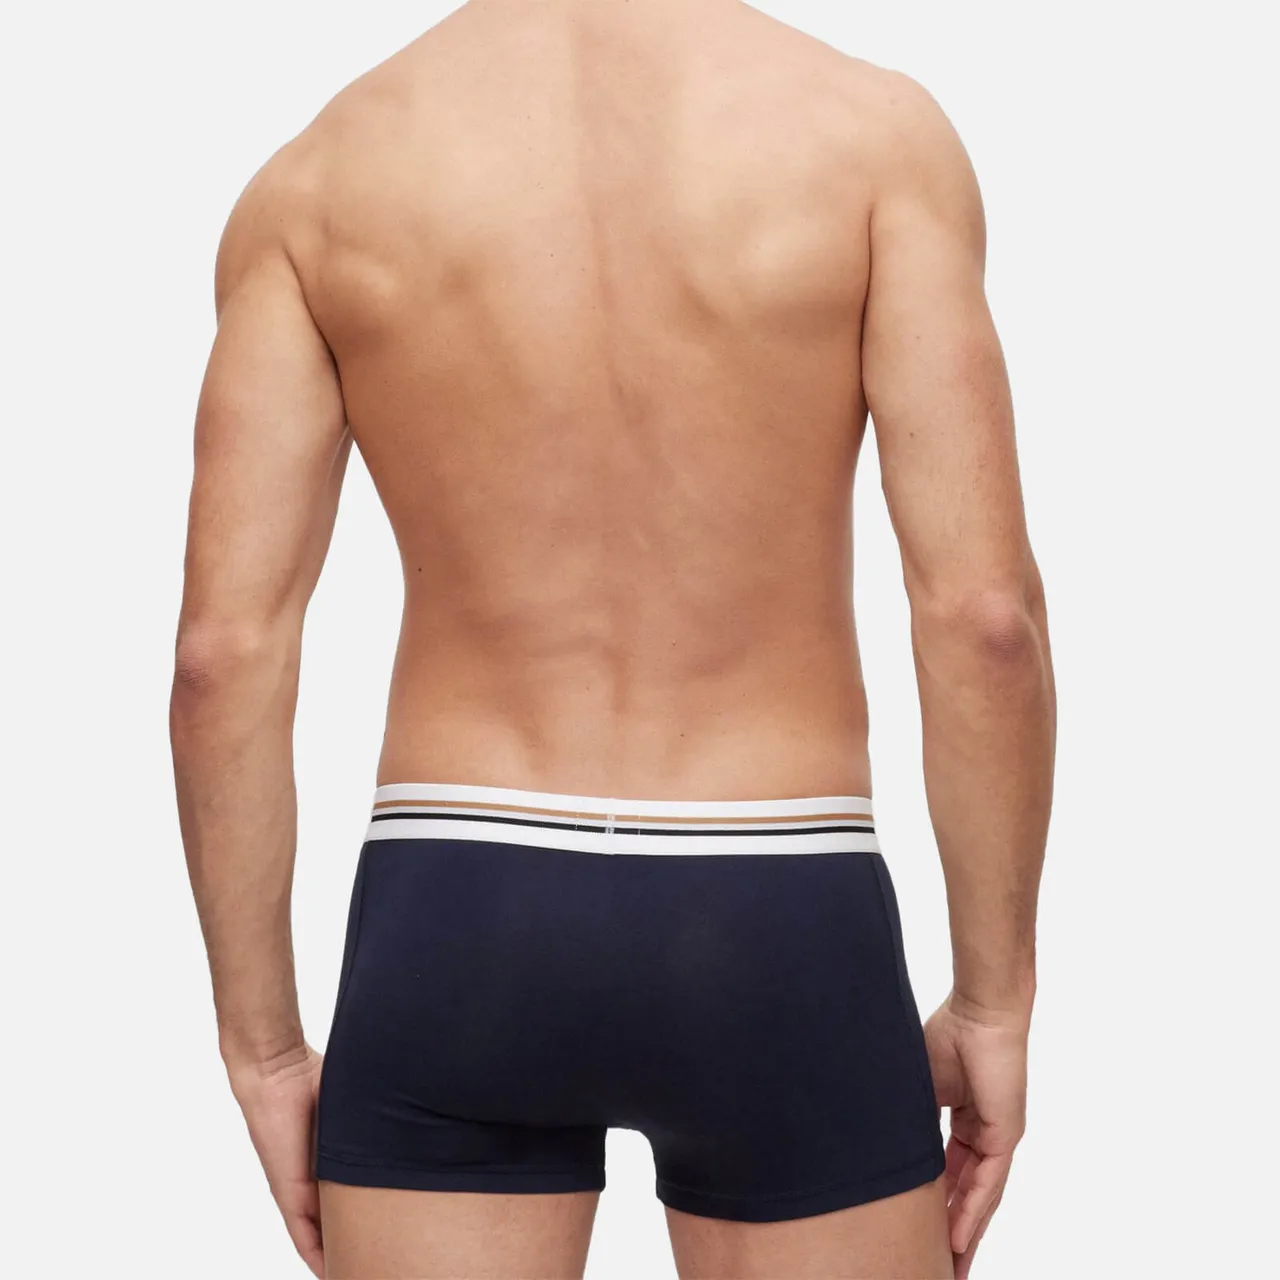 BOSS Bodywear Revive Three-Pack Jersey Boxer Shorts